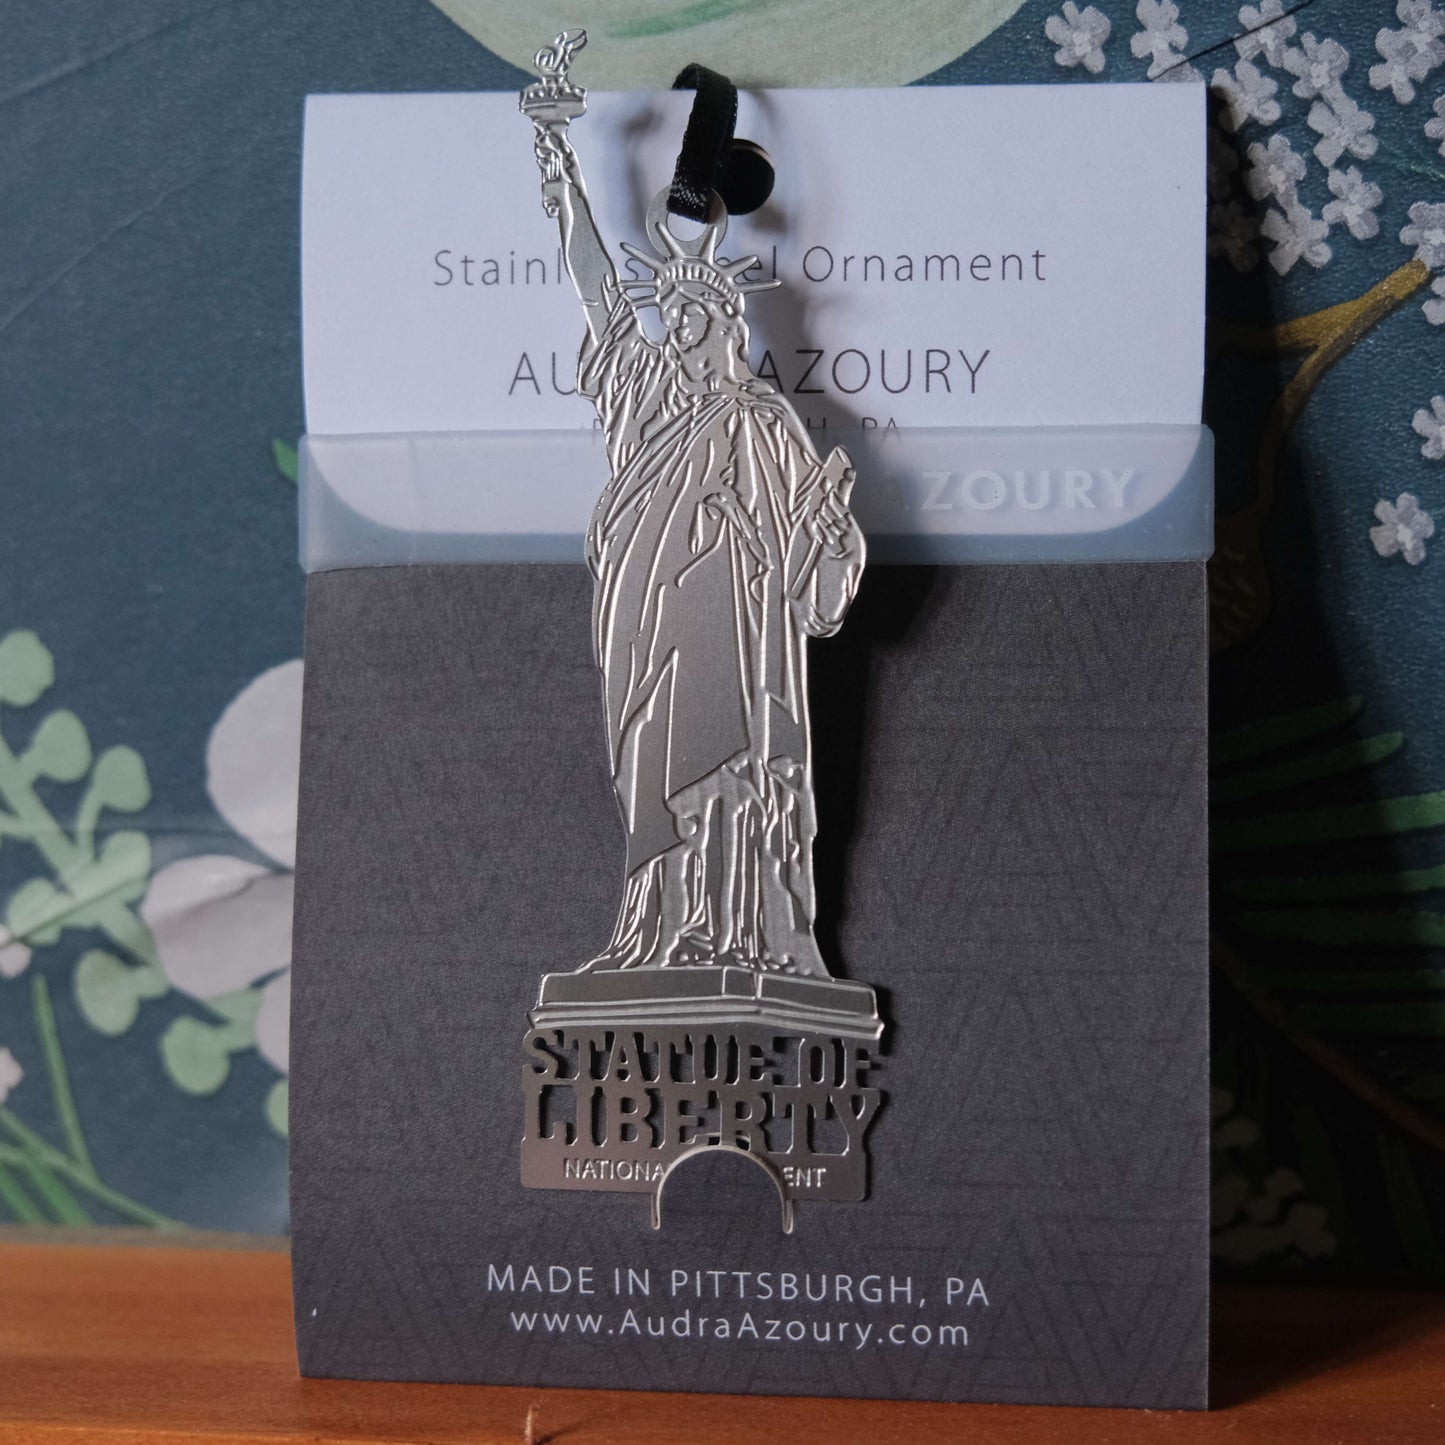 Statue of Liberty National Monument Ornament by Audra Azoury